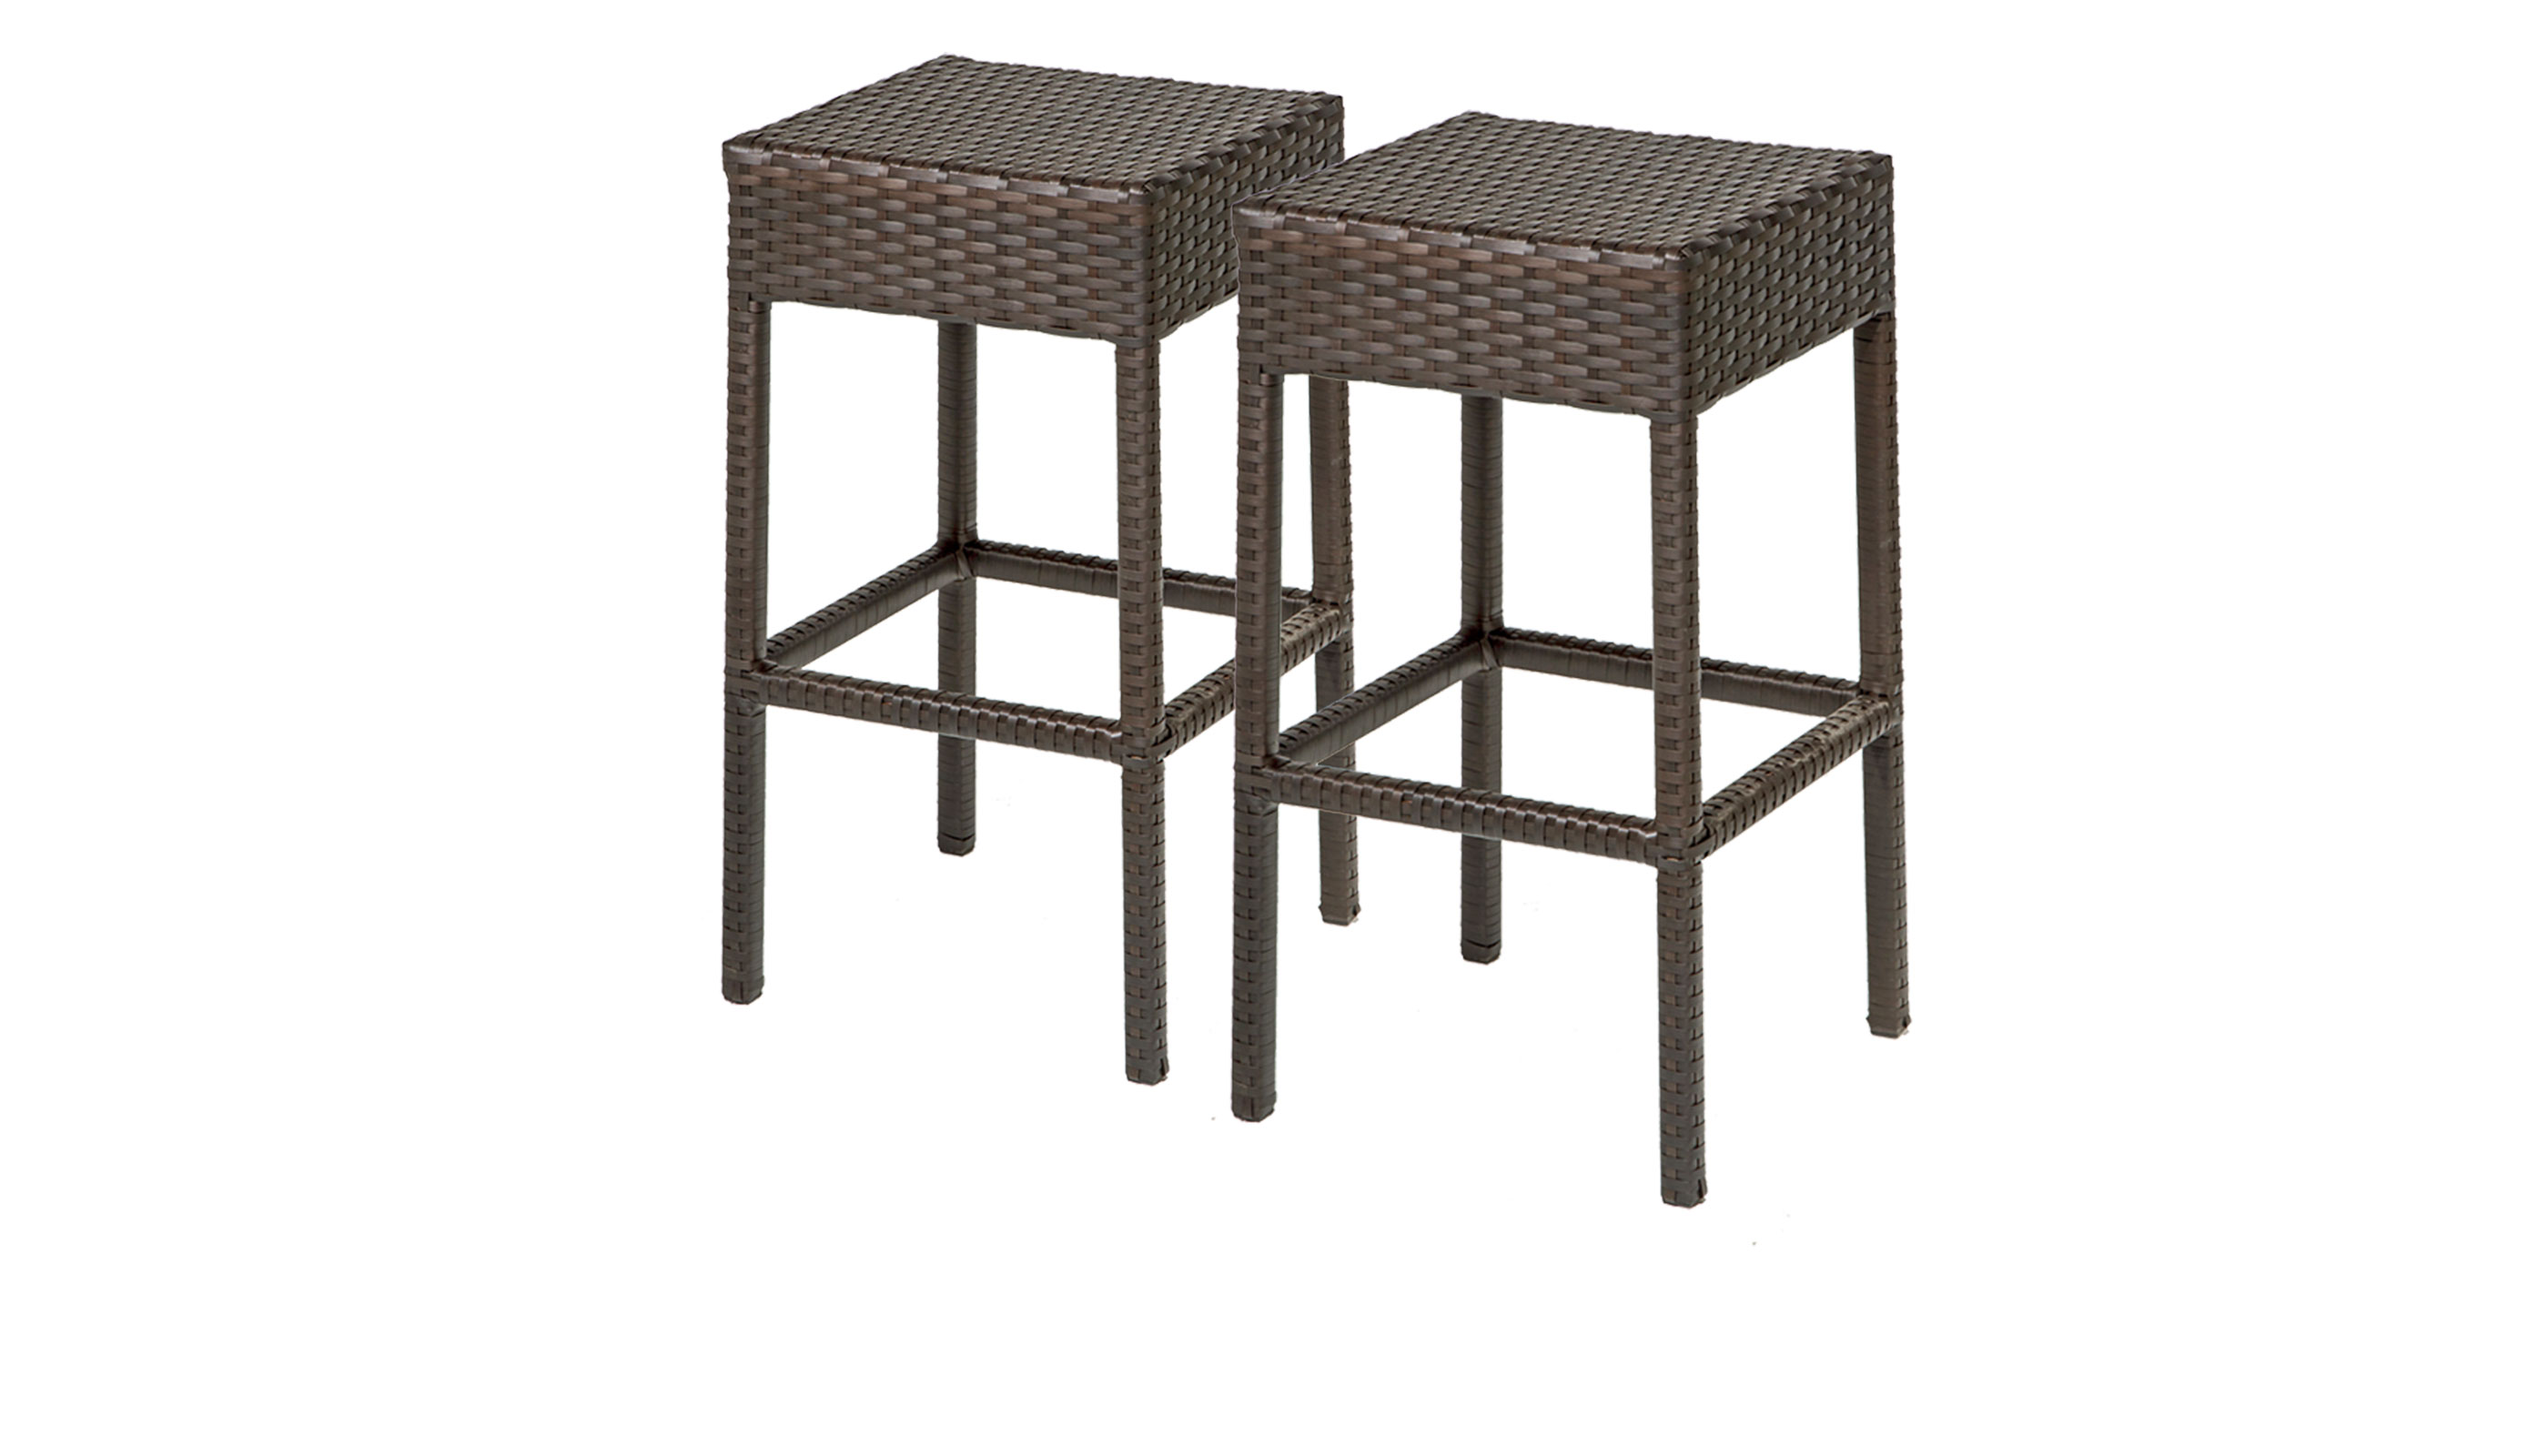 Barbados Bar Table Set with Cart, Basket, and 2 Backless Barstools 5 Piece Outdoor Wicker Patio Furniture - TK Classics